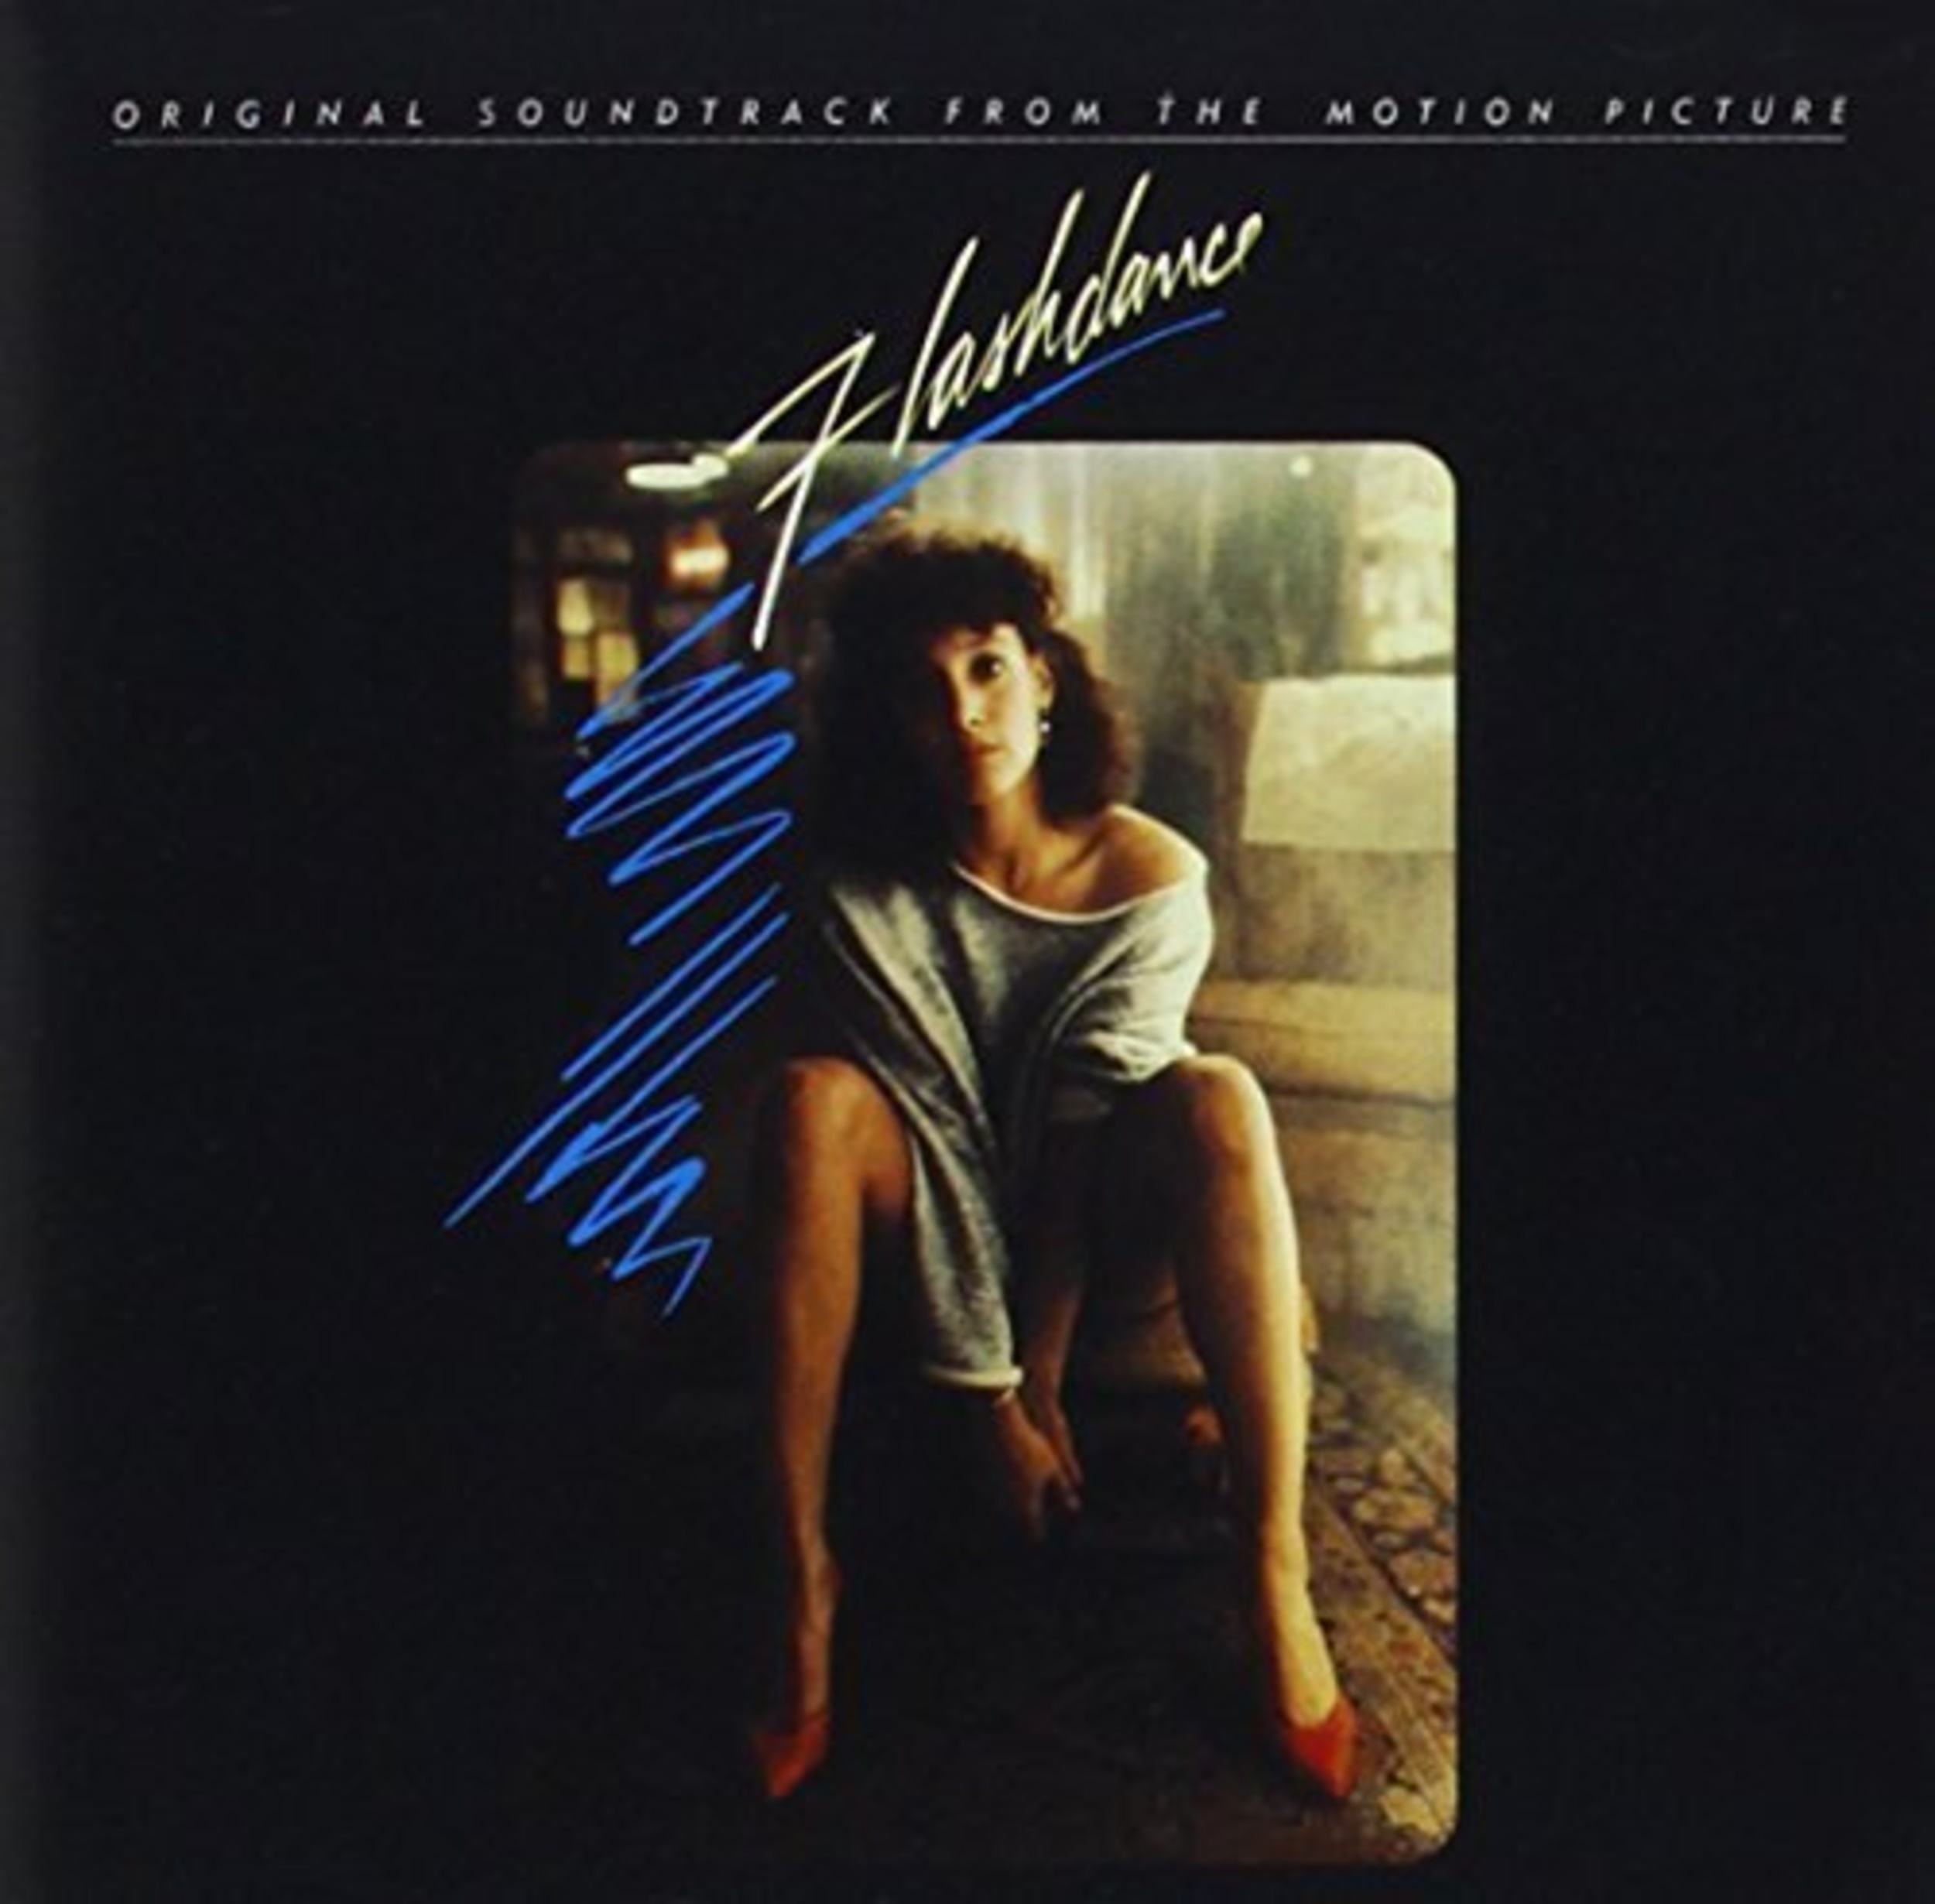 <p>The 1980s were the decade that arguably kickstarted the consistent run of hit singles off movie soundtracks. One of the biggest came from versatile musician, songwriter, composer, and producer Michael Sembello on the <em>Flashdance</em> soundtrack. "Maniac" is a high-energy '80s track that was a No. 1 hit, widely popular on MTV, and nominated for an Academy Award. The song was featured on Sembello's own <em>Bossa Nova Hotel</em> album, which also included another top-40 single, "Automatic Man," that many probably don't remember.</p><p><a href='https://www.msn.com/en-us/community/channel/vid-cj9pqbr0vn9in2b6ddcd8sfgpfq6x6utp44fssrv6mc2gtybw0us'>Follow us on MSN to see more of our exclusive entertainment content.</a></p>